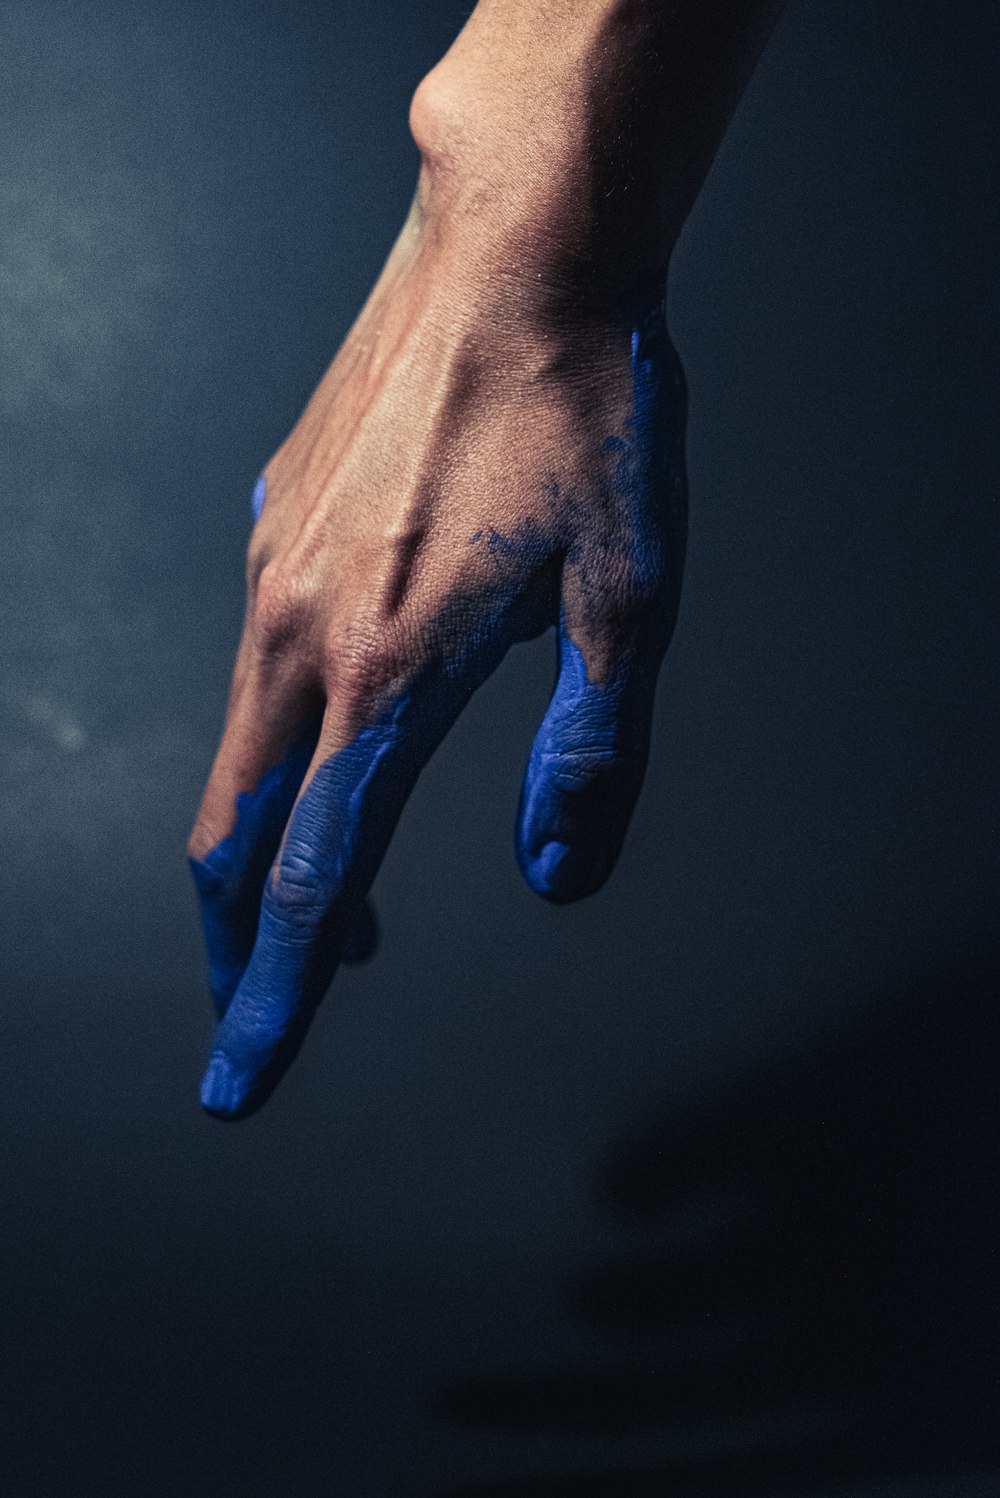 persons left hand with blue nail polish